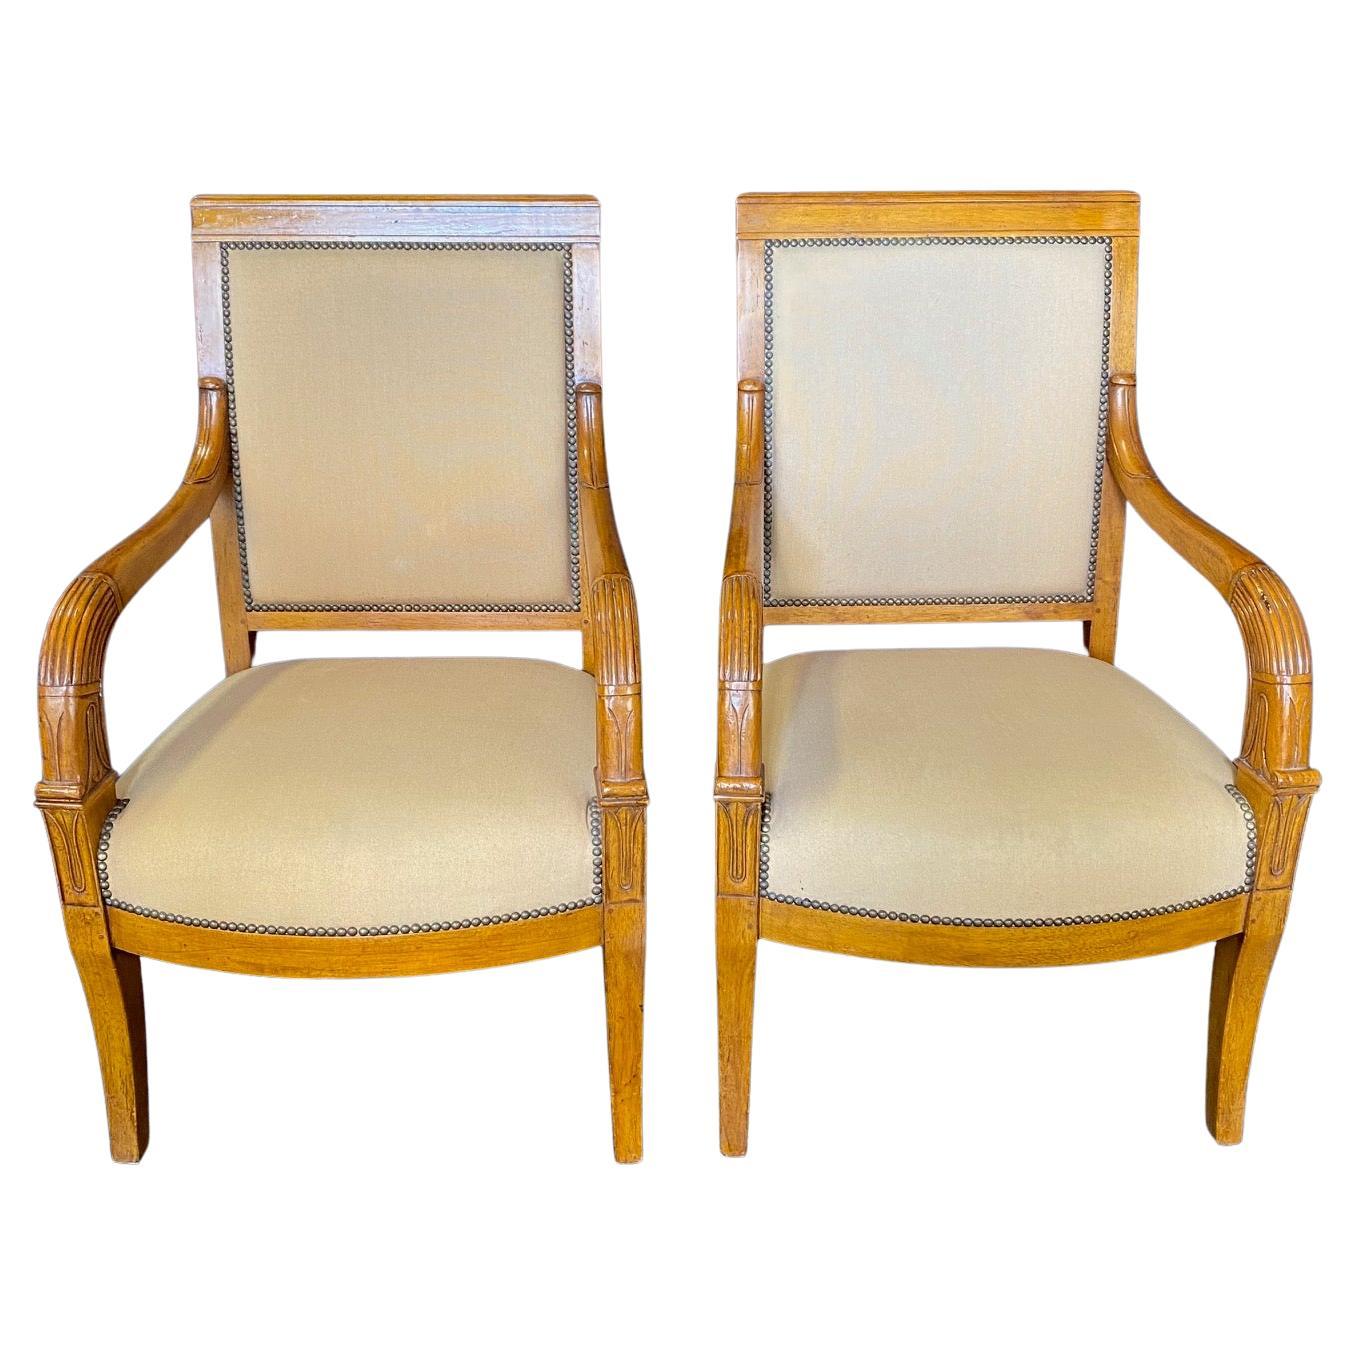  Pair of French Antique Walnut Empire Tulip Fauteuils or Armchairs  For Sale